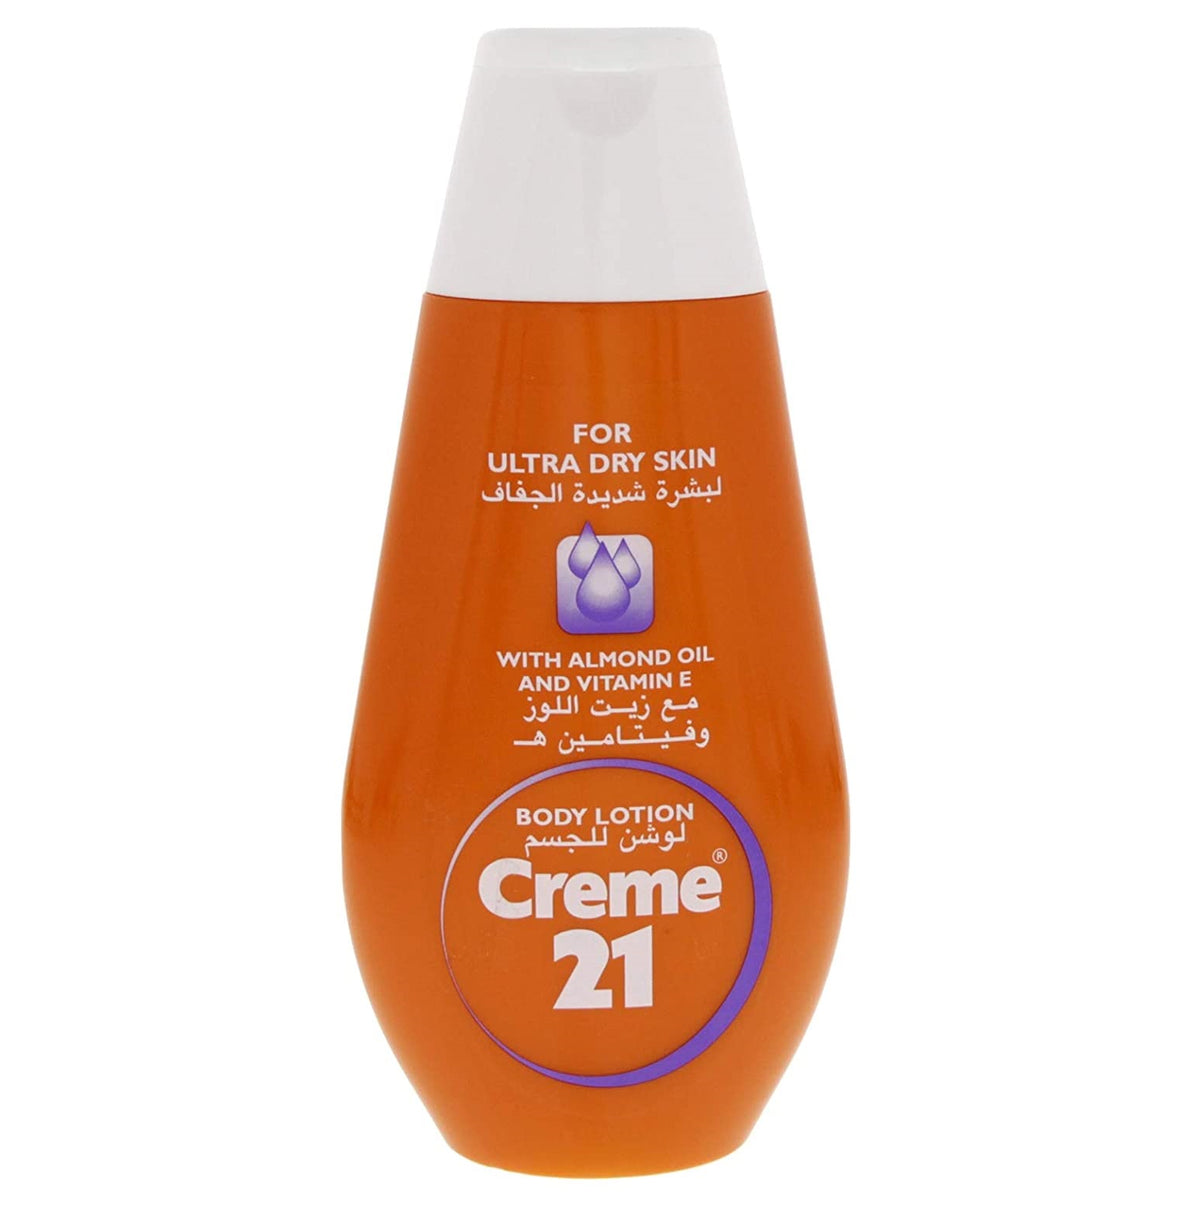 Creme 21 Body Lotion for Ultra Dry Skin with Vitamin E & Almond Oil -250ml